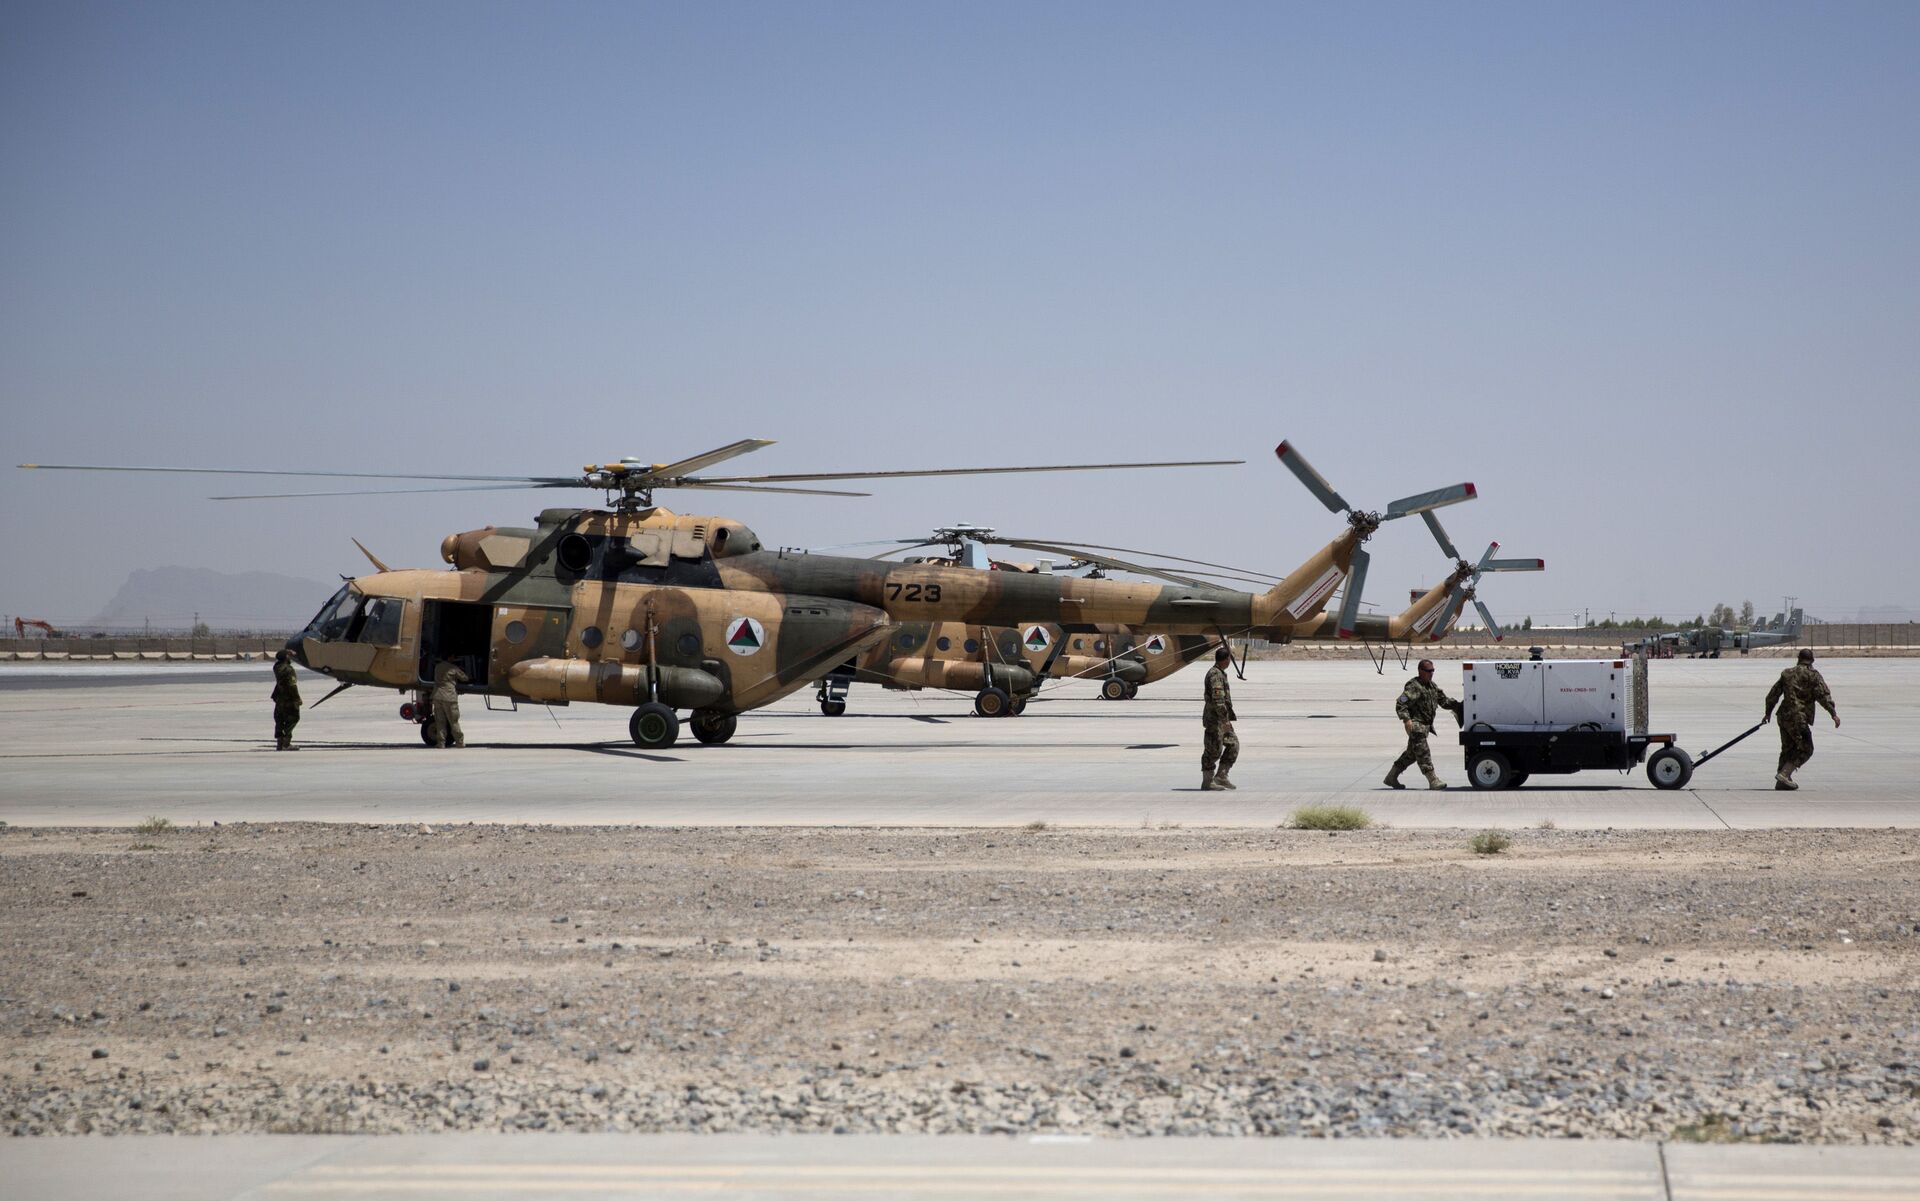 Members of Afghanistan's National Army work near military helicopters, in Kandahar Air Field, Afghanistan, Tuesday, Aug. 18, 2015. Since the departure from Afghanistan last year of most international combat troops, Afghan security forces have been fighting the insurgency alone. Figures show that casualty rates are extremely high, reflecting an emboldened Taliban testing the commitment and strength of the Afghan military. (AP Photo/Massoud Hossaini) - Sputnik International, 1920, 19.01.2022